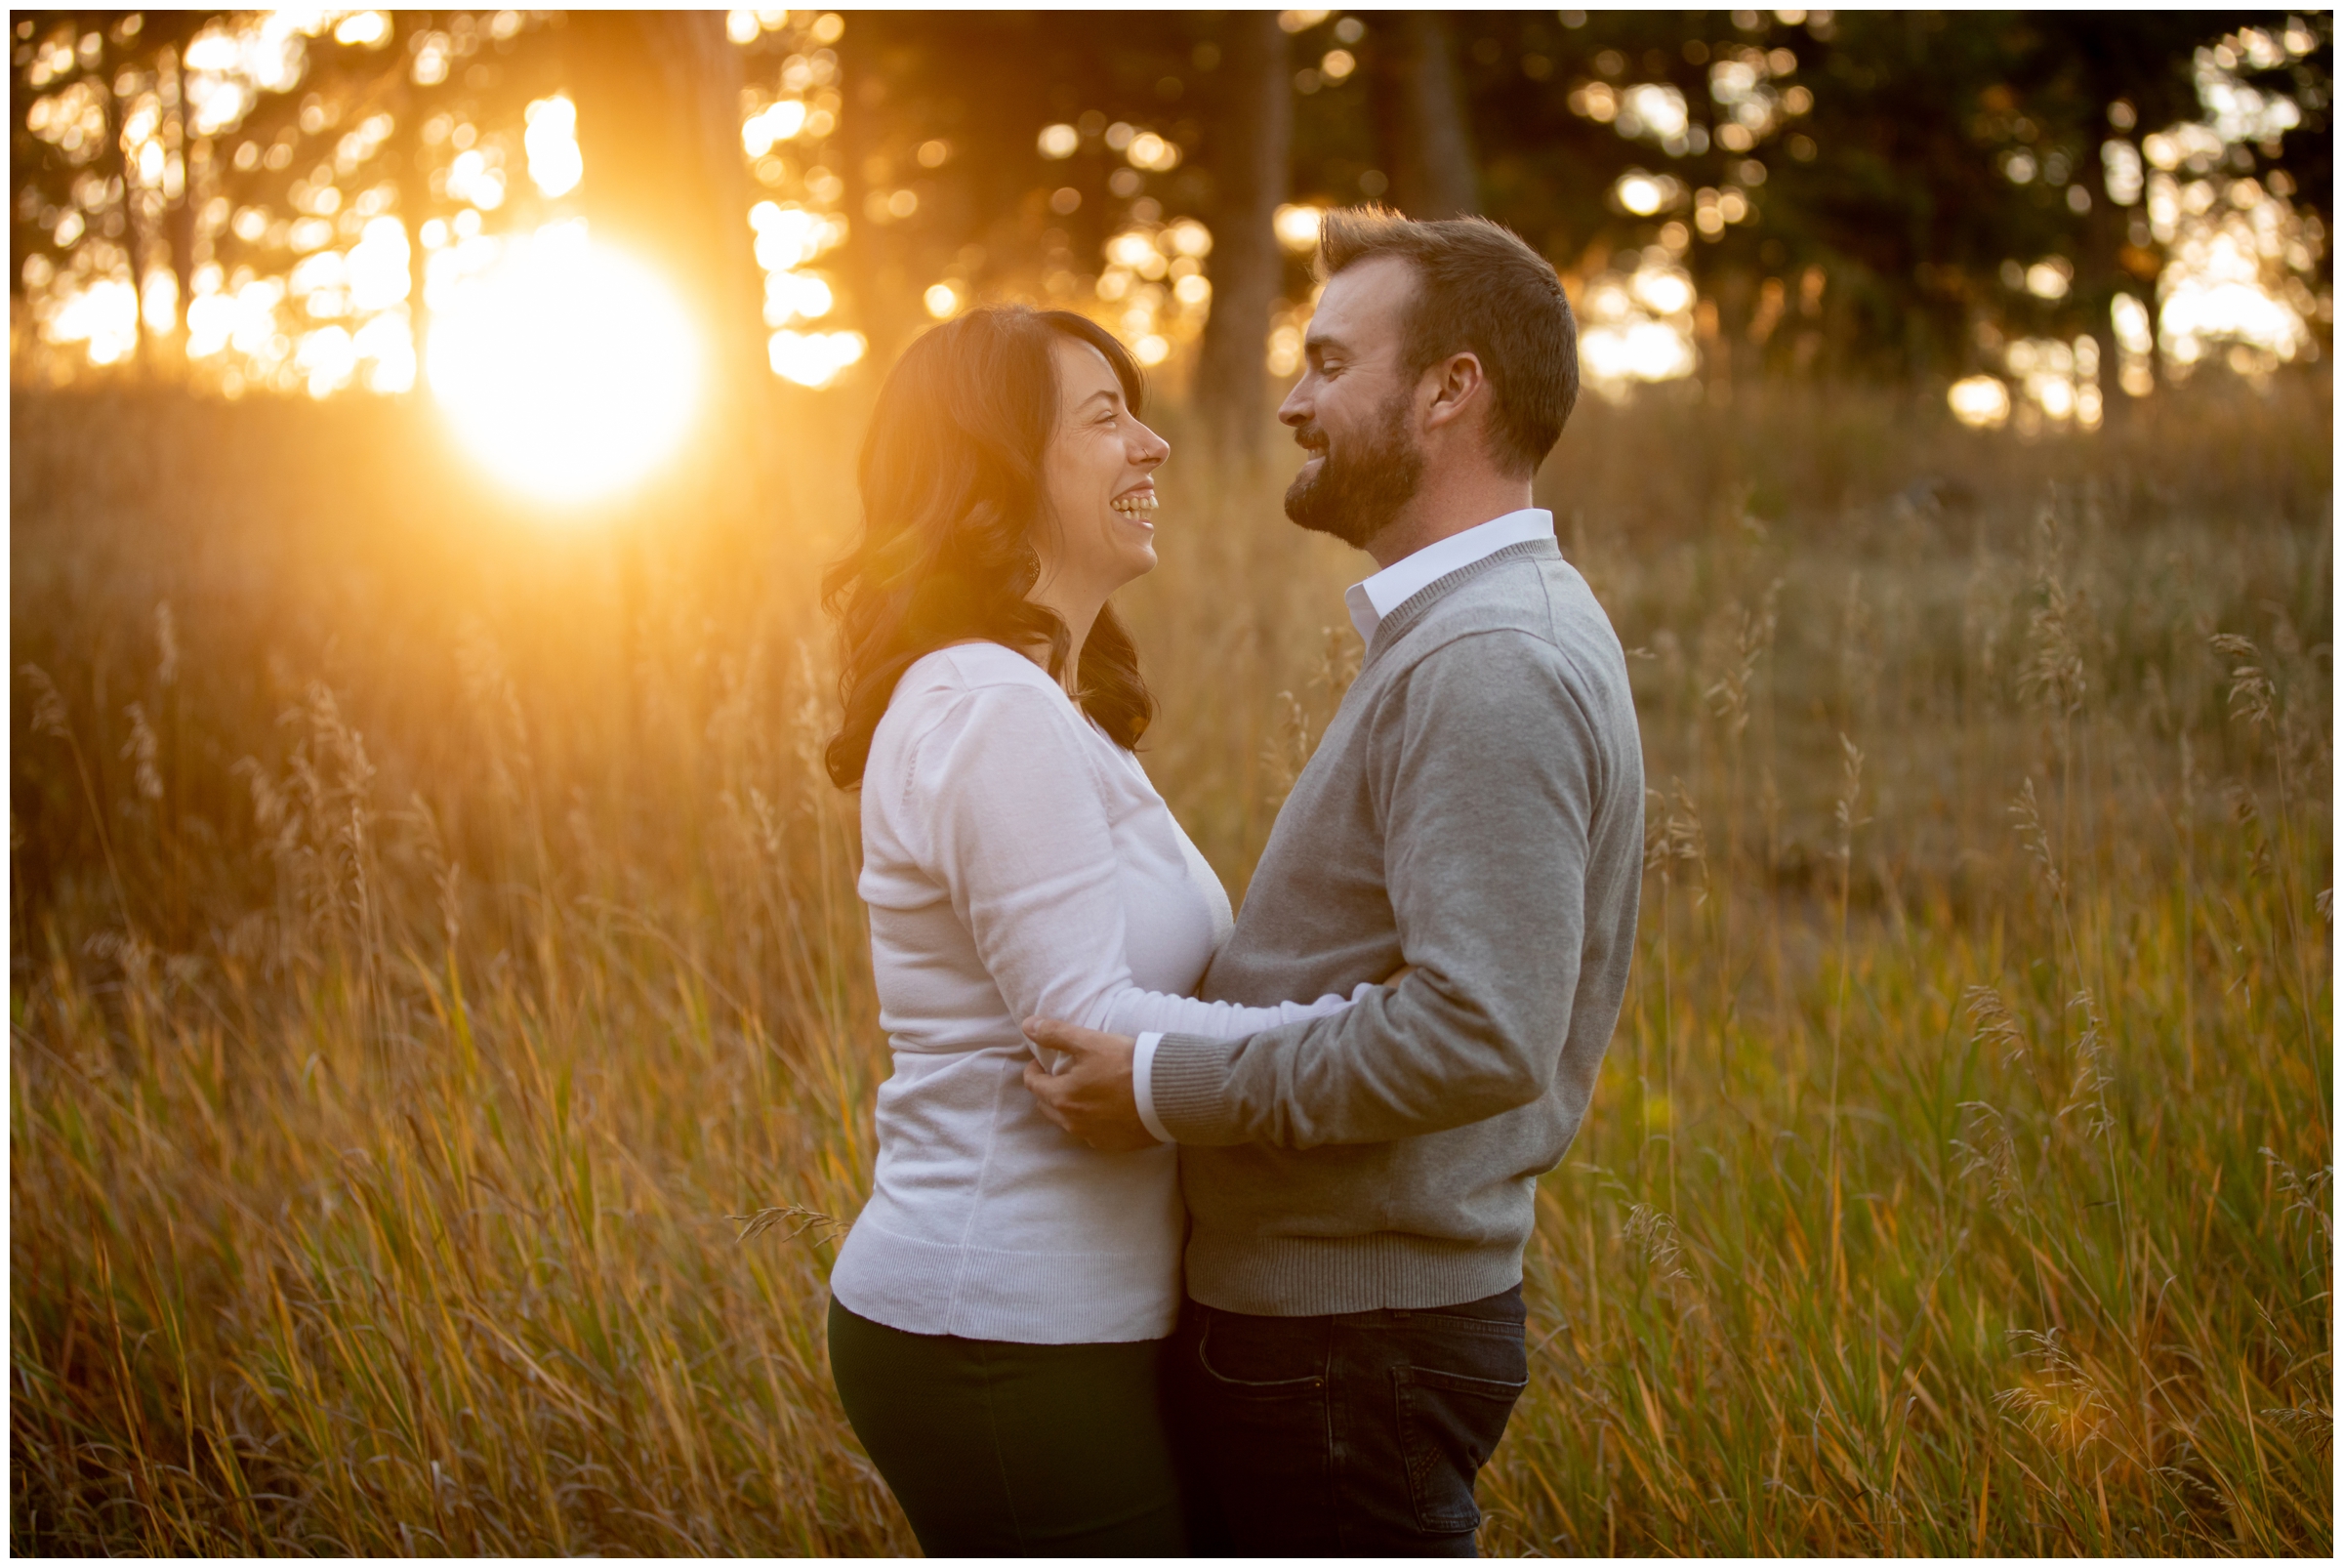 sunny forest engagement portraits inspiration in Colorado mountains 